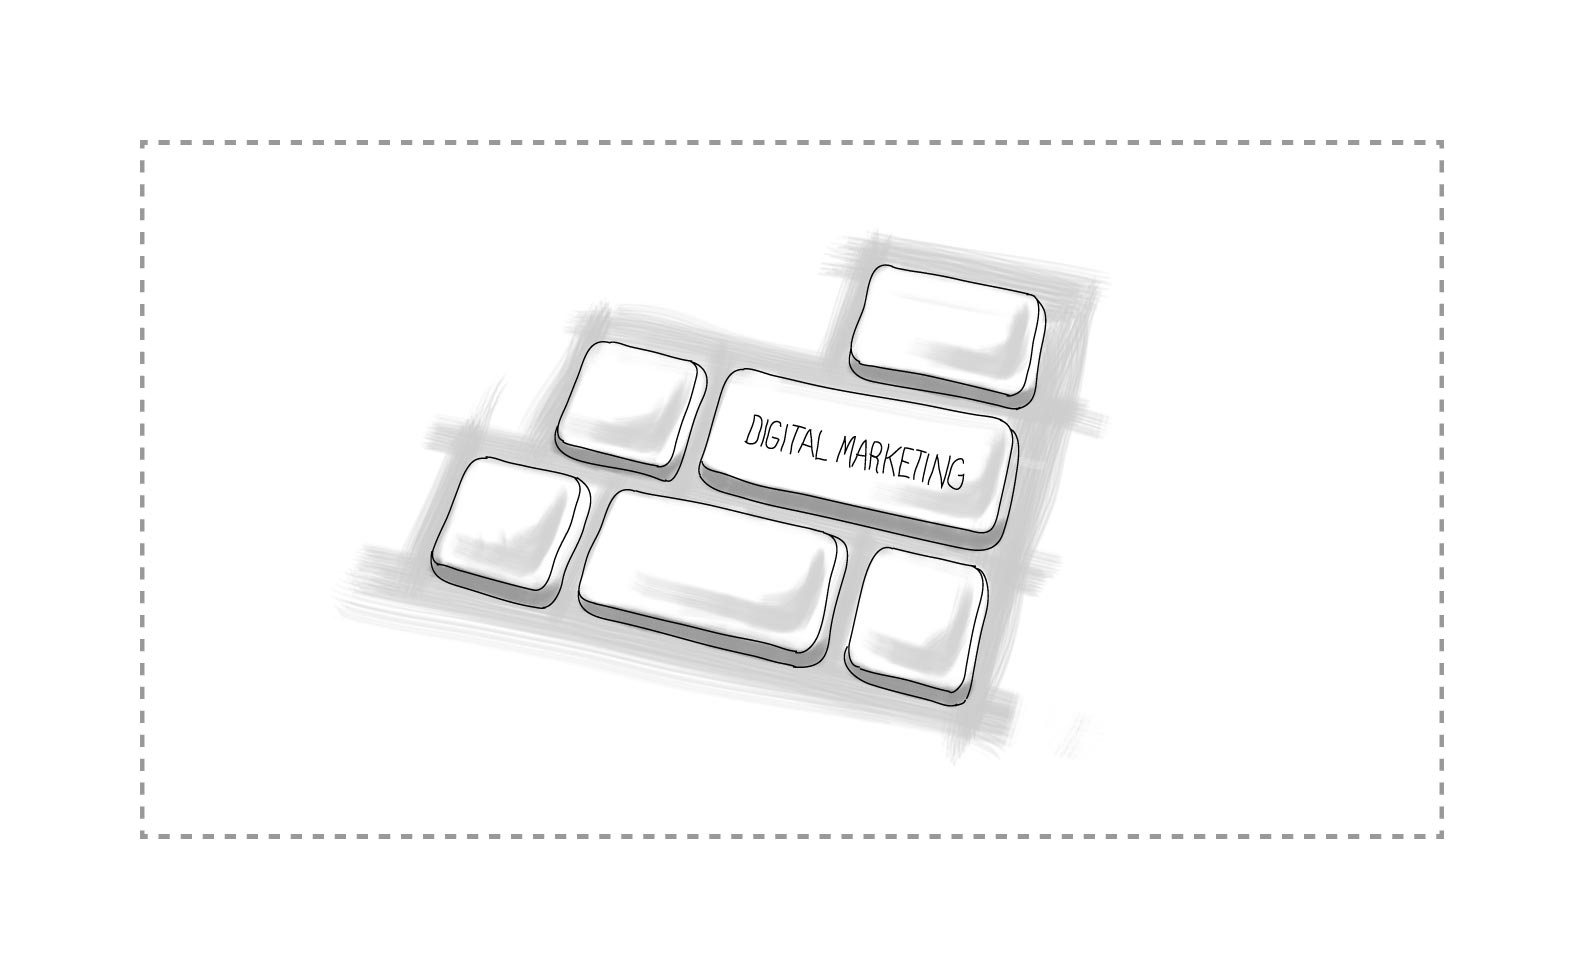 A keyboard that features a key that reads Digital Marketing